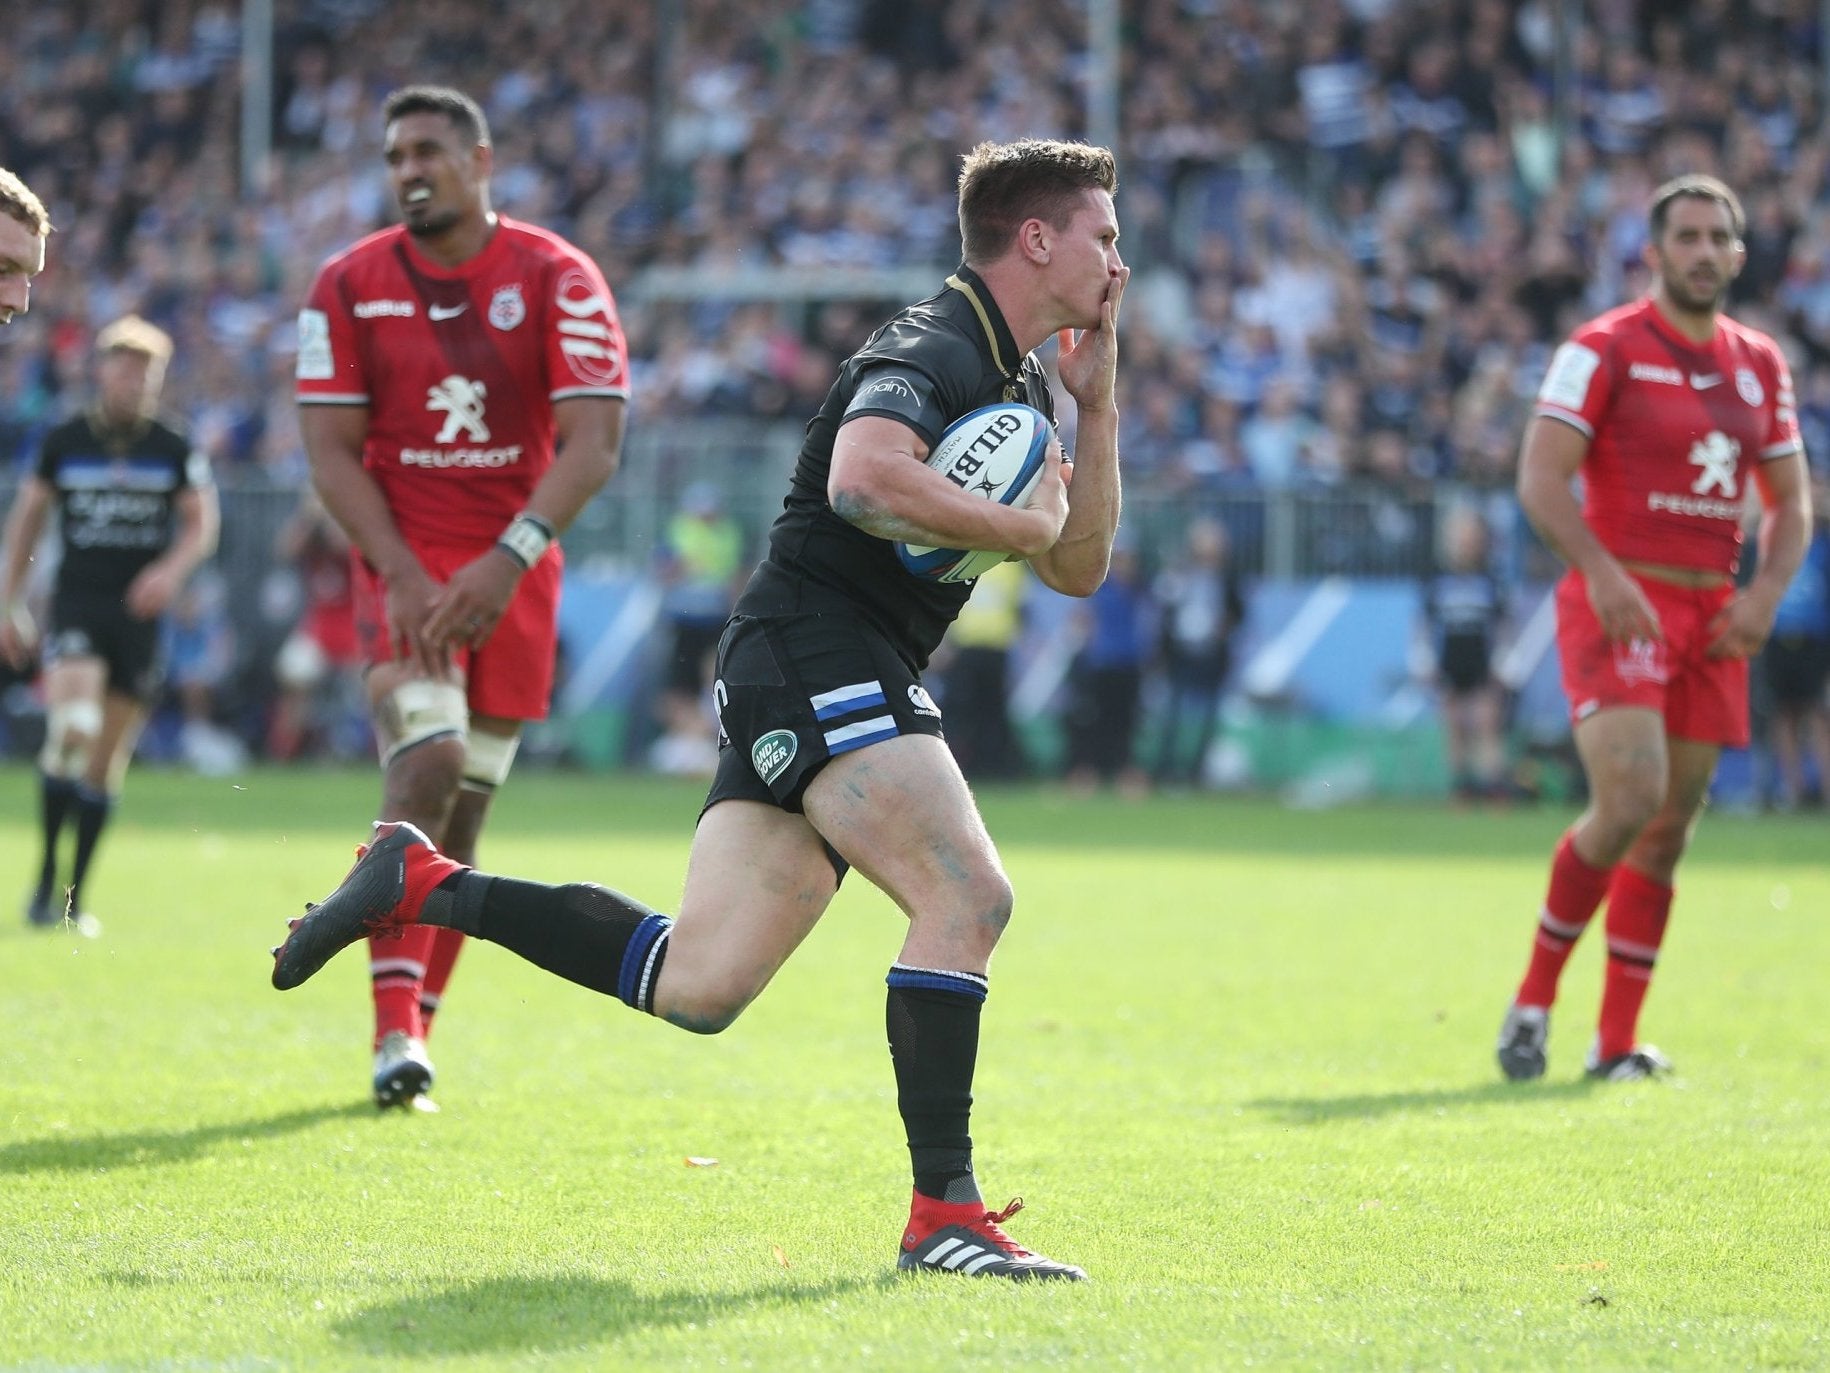 Burns celebrated before putting the ball down for what would have been a match-winning try